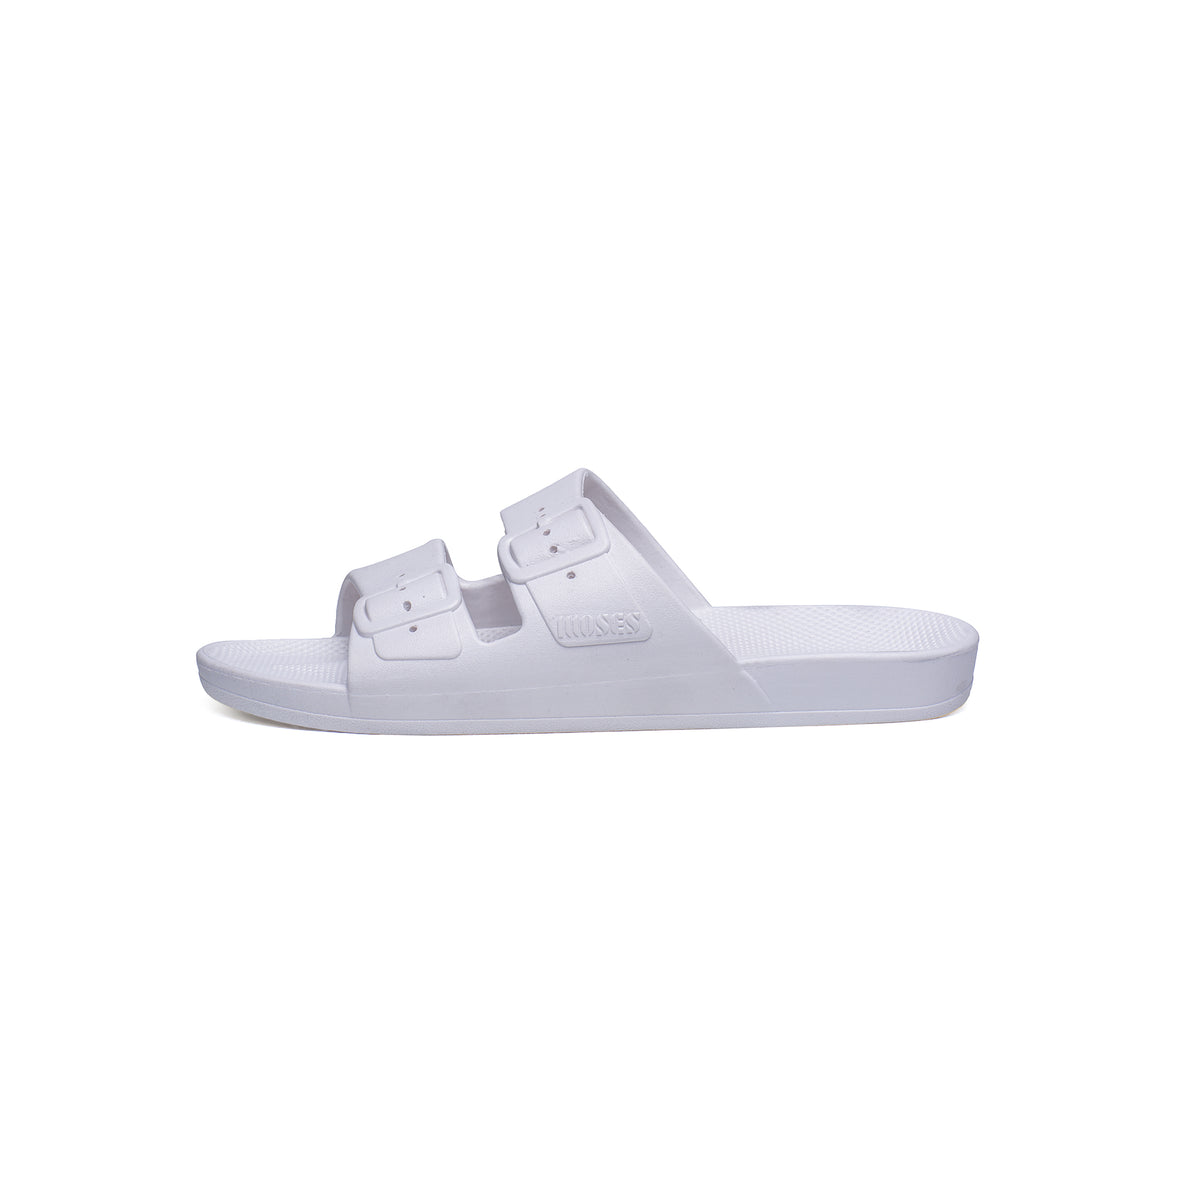 Parallel Culture Shoes and Fashion Online SLIDES FREEDOM MOSES FREEDOM MOSES SOLIDS WHITE